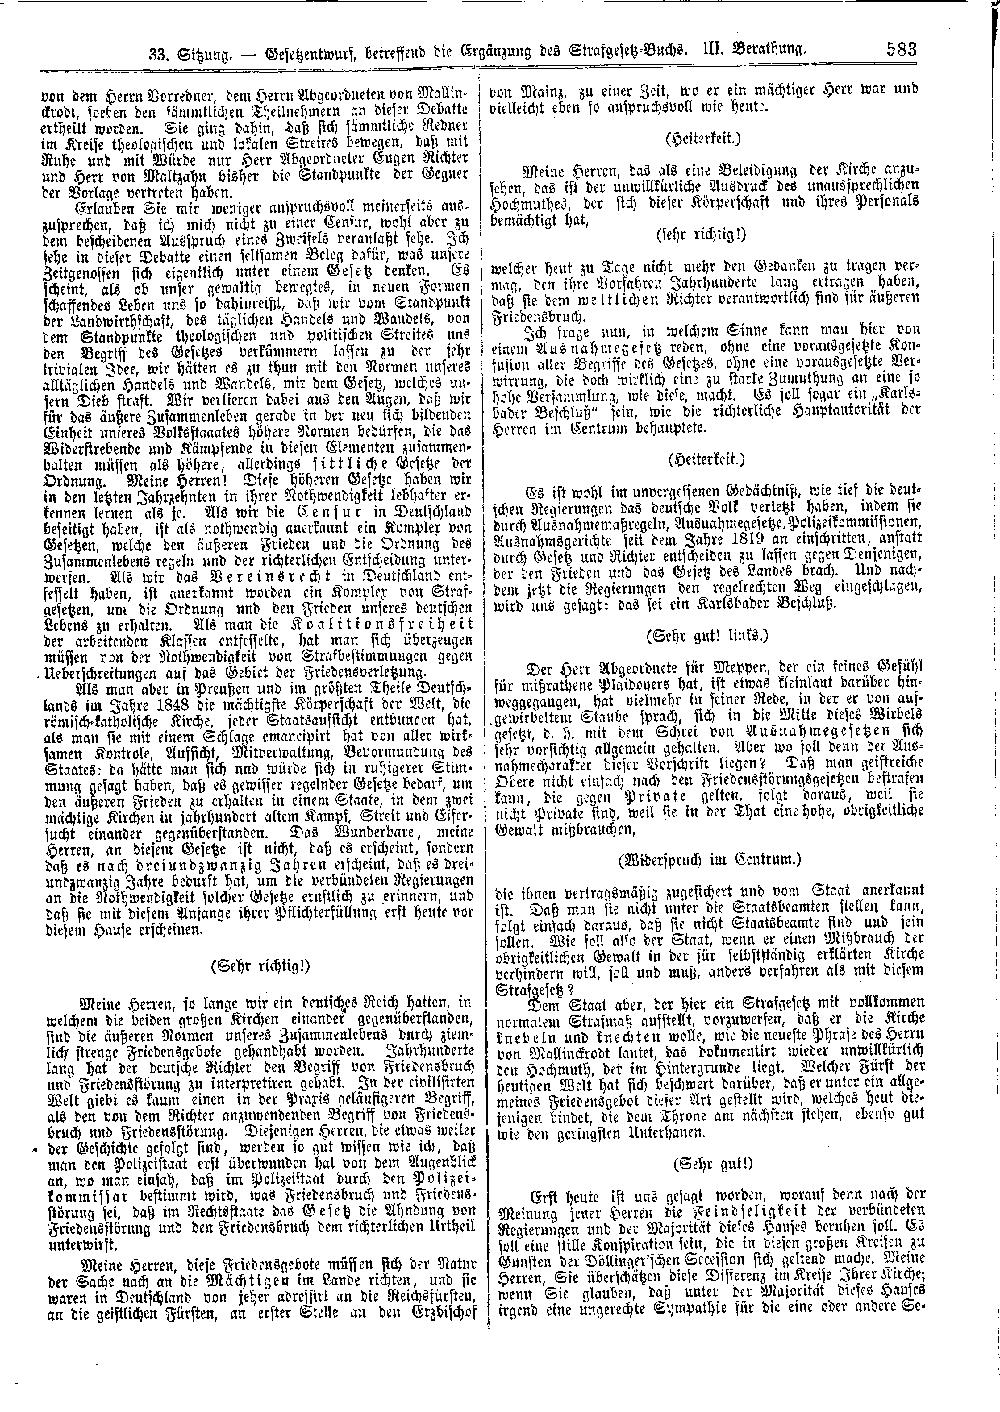 Scan of page 583